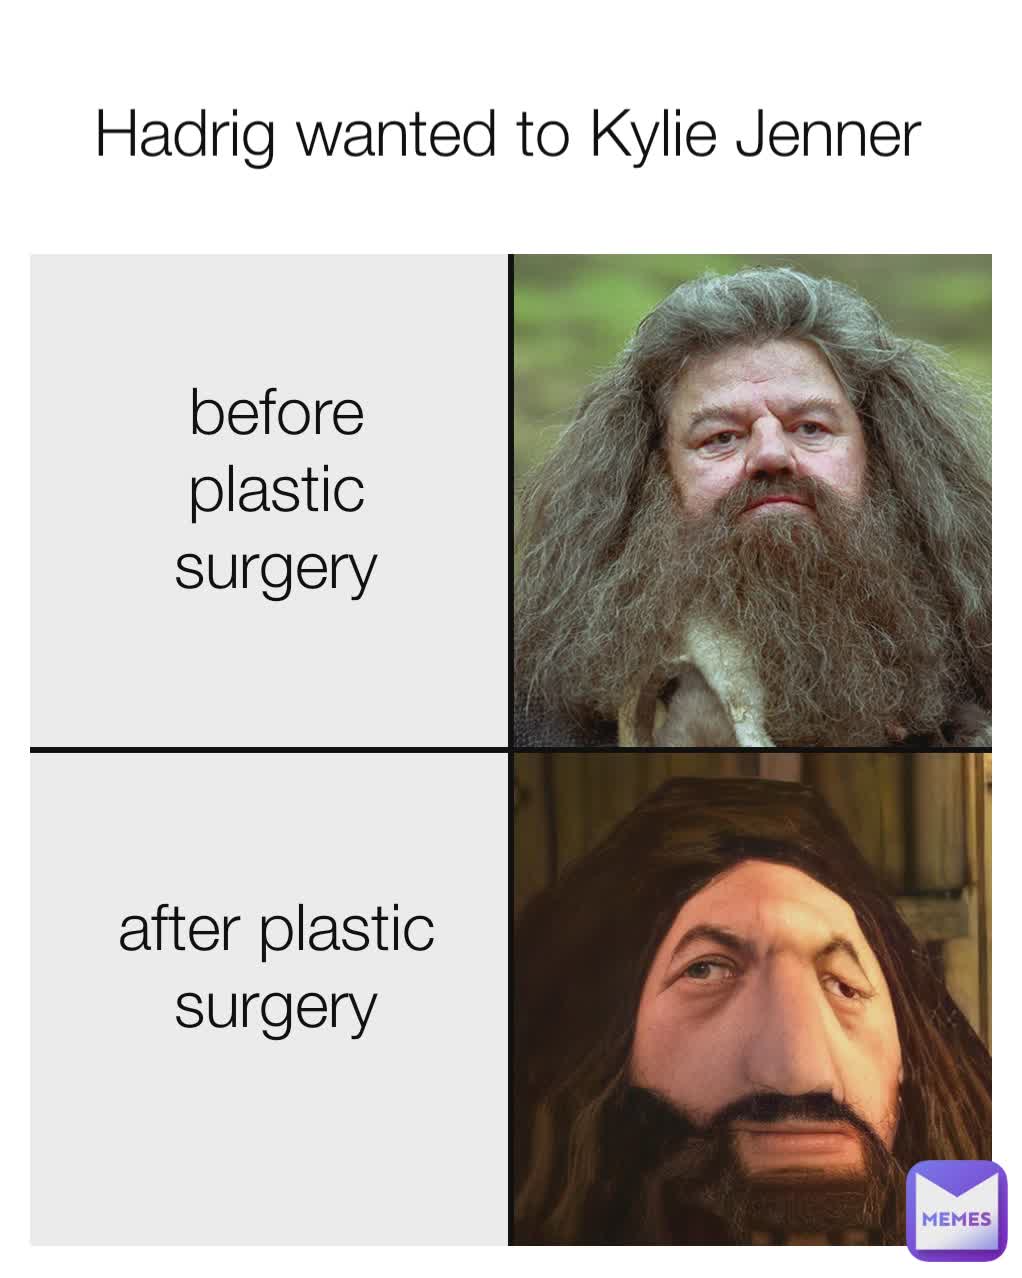 before plastic surgery after plastic surgery Hadrig wanted to Kylie Jenner